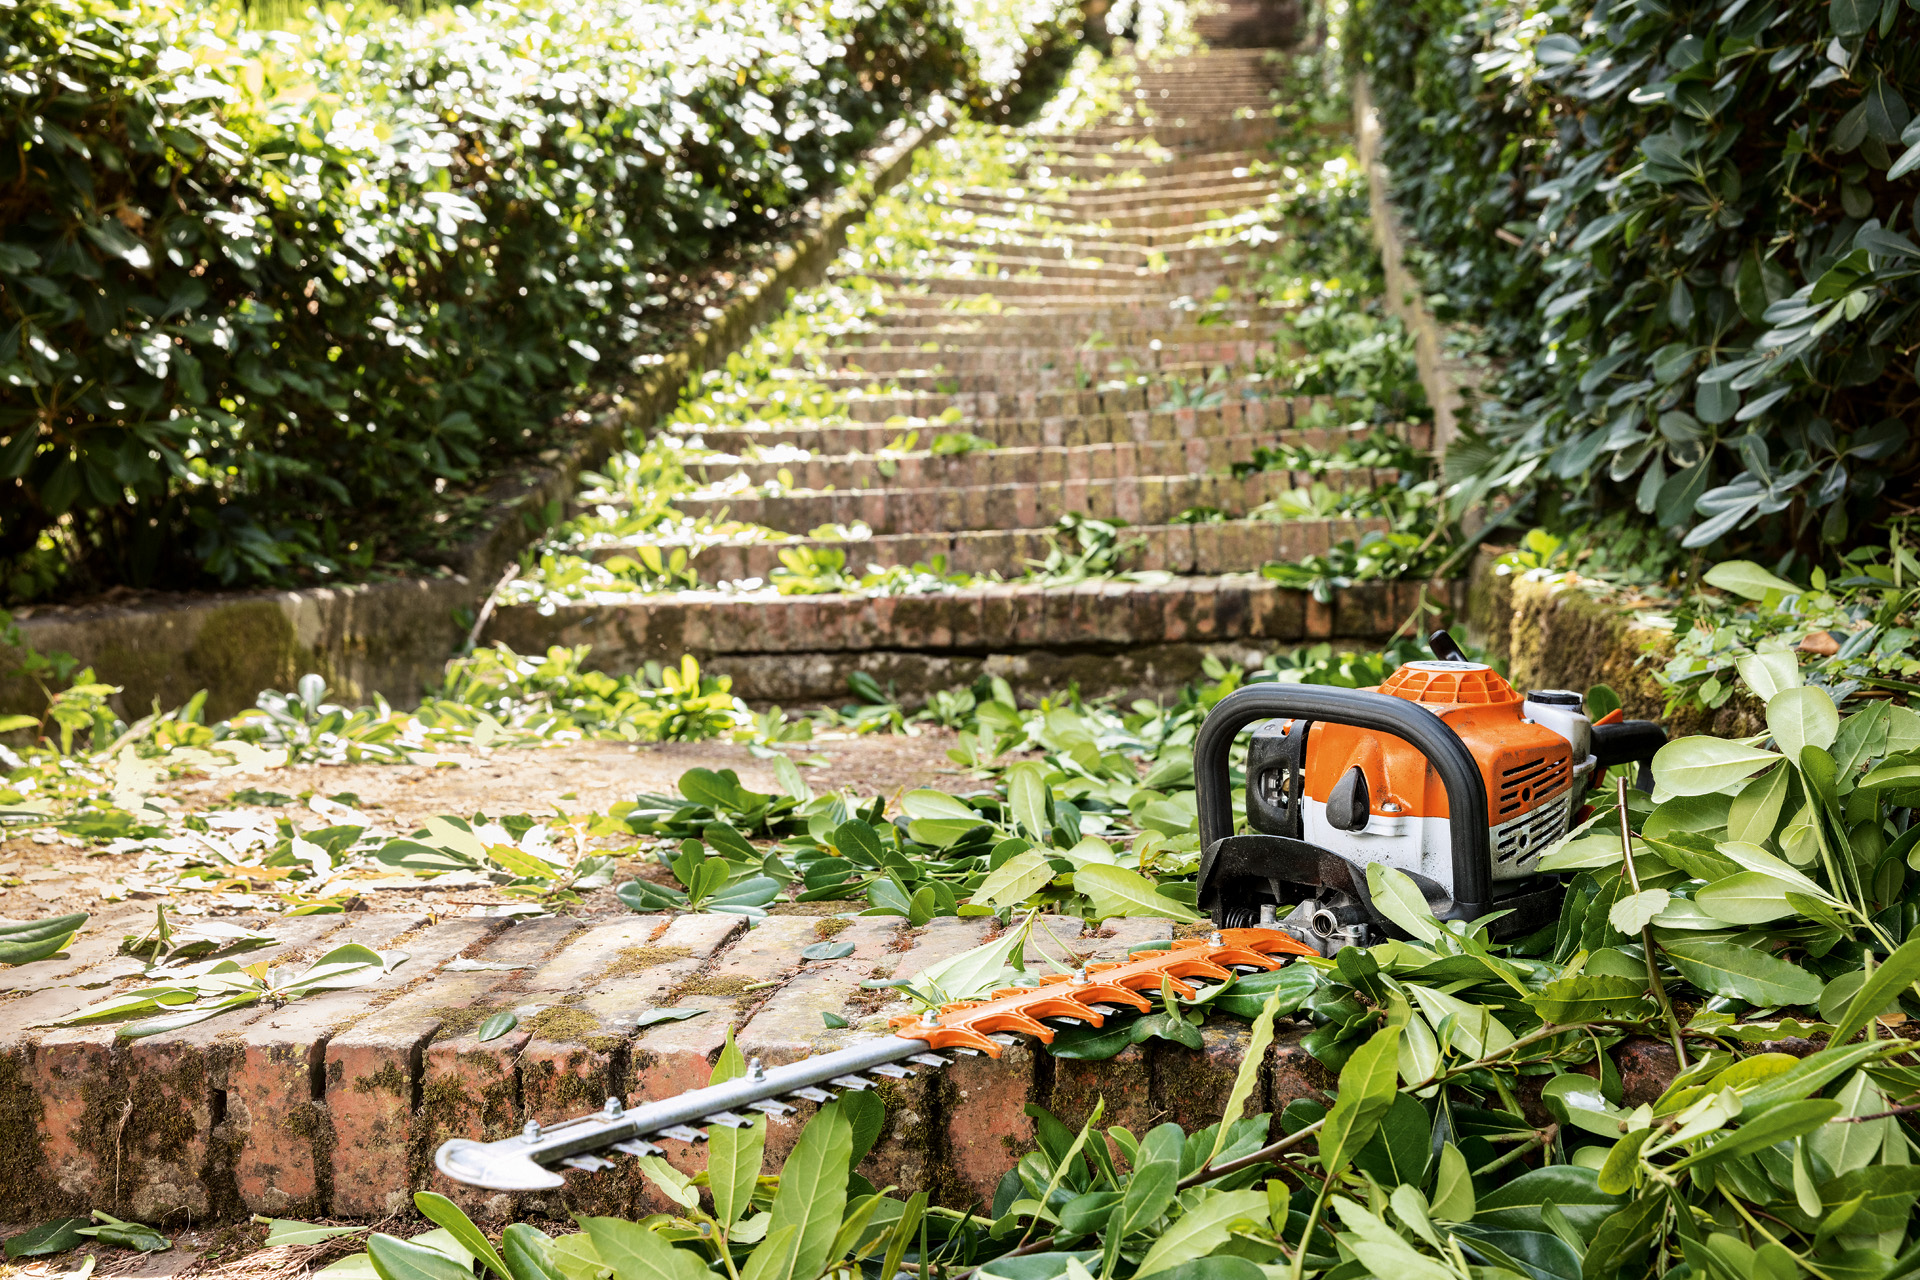 A STIHL HS 82 T petrol-driven hedge trimmer on a brick wall, surrounded by trimmings at the foot of a stone staircase